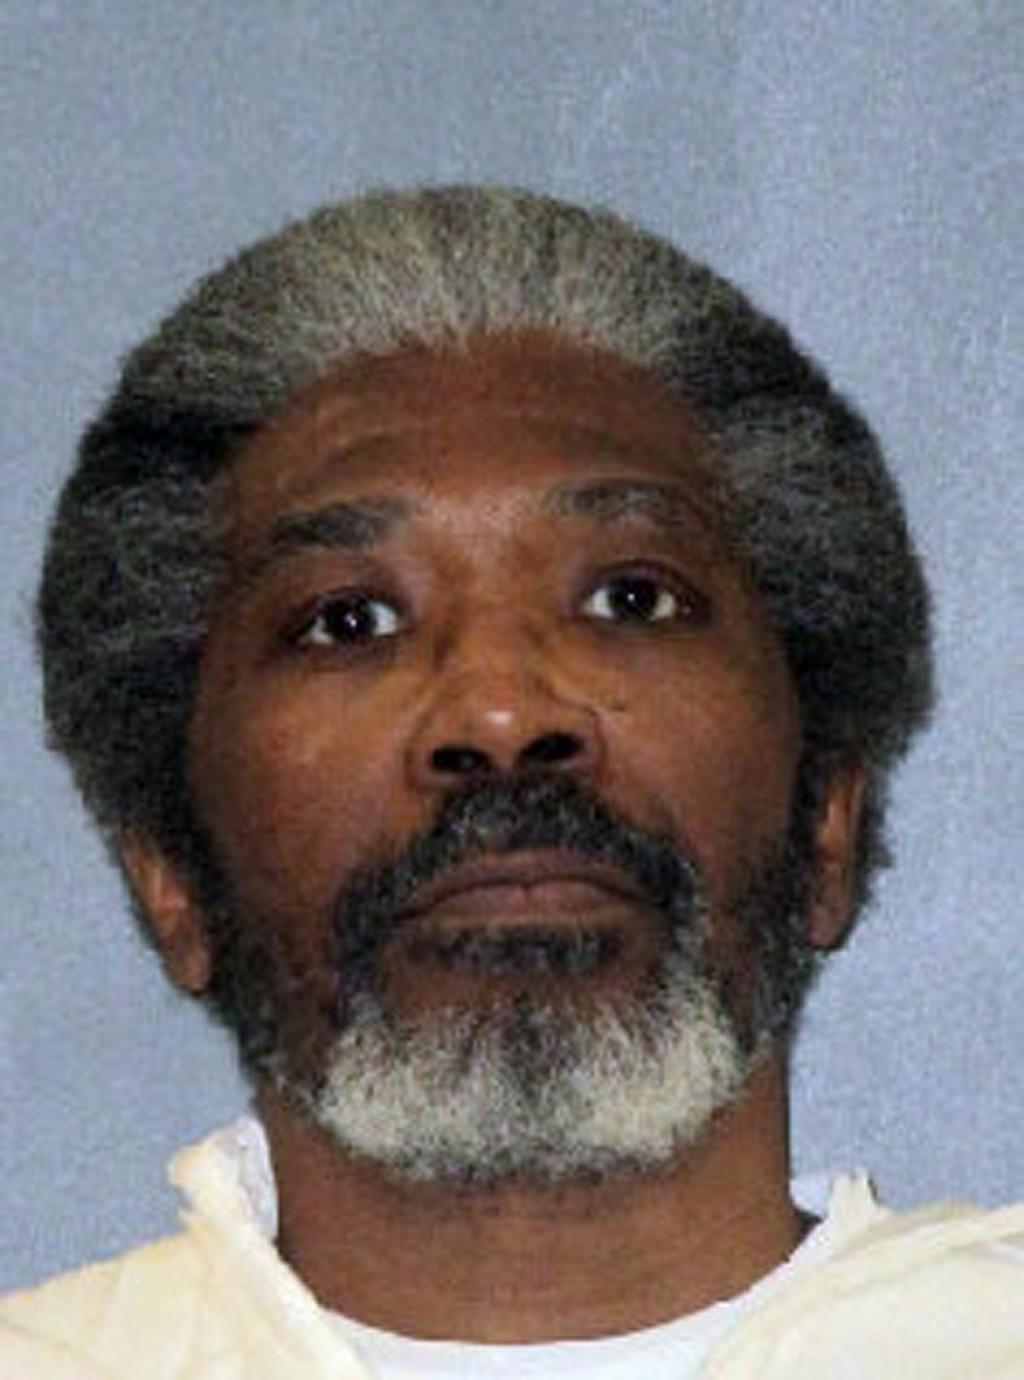 Texas Executes Robert Jennings in Nation’s First Execution of 2019